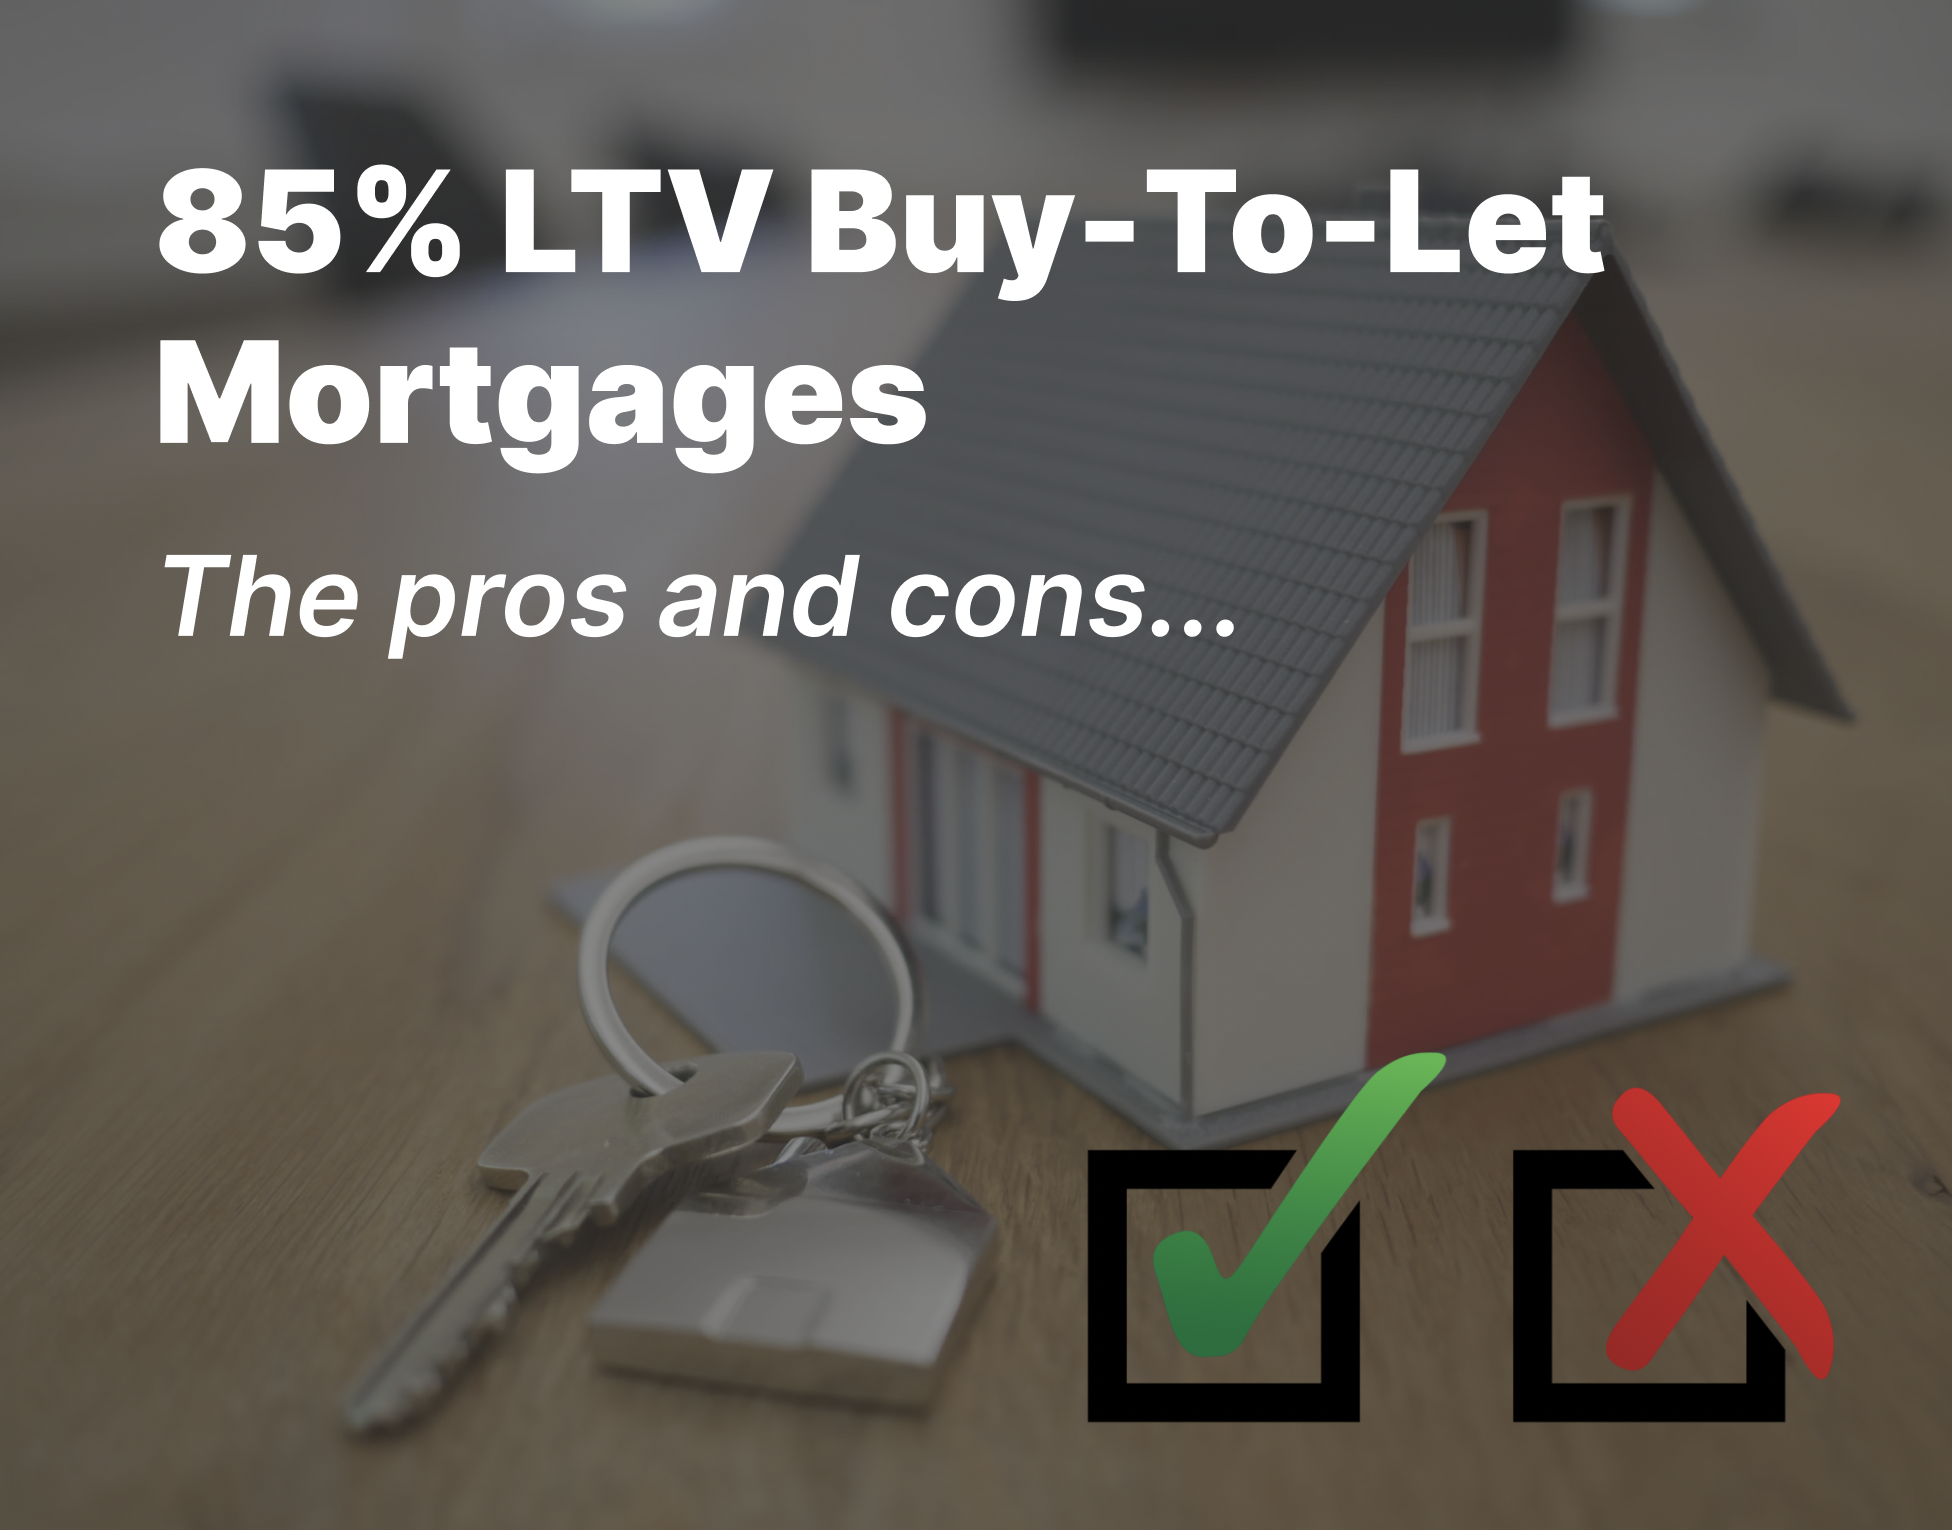 Unlock the Potential: 85% Loan-to-Value Buy-to-Let Mortgages main image.